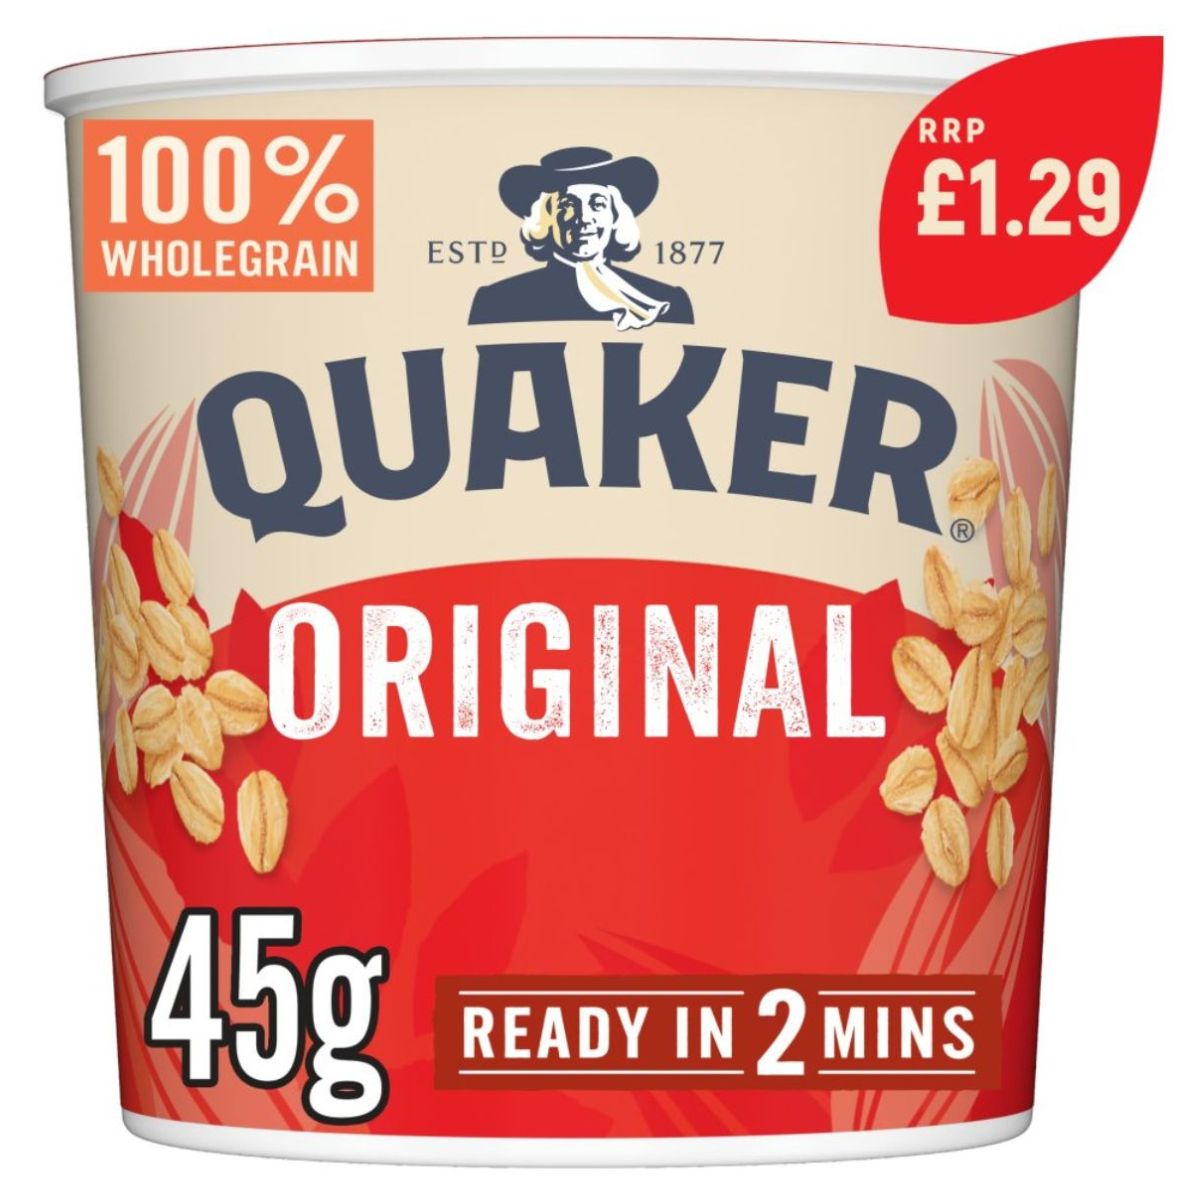 A cup of Quaker - Oat So Simple Original - 45g ready in 2 minutes.